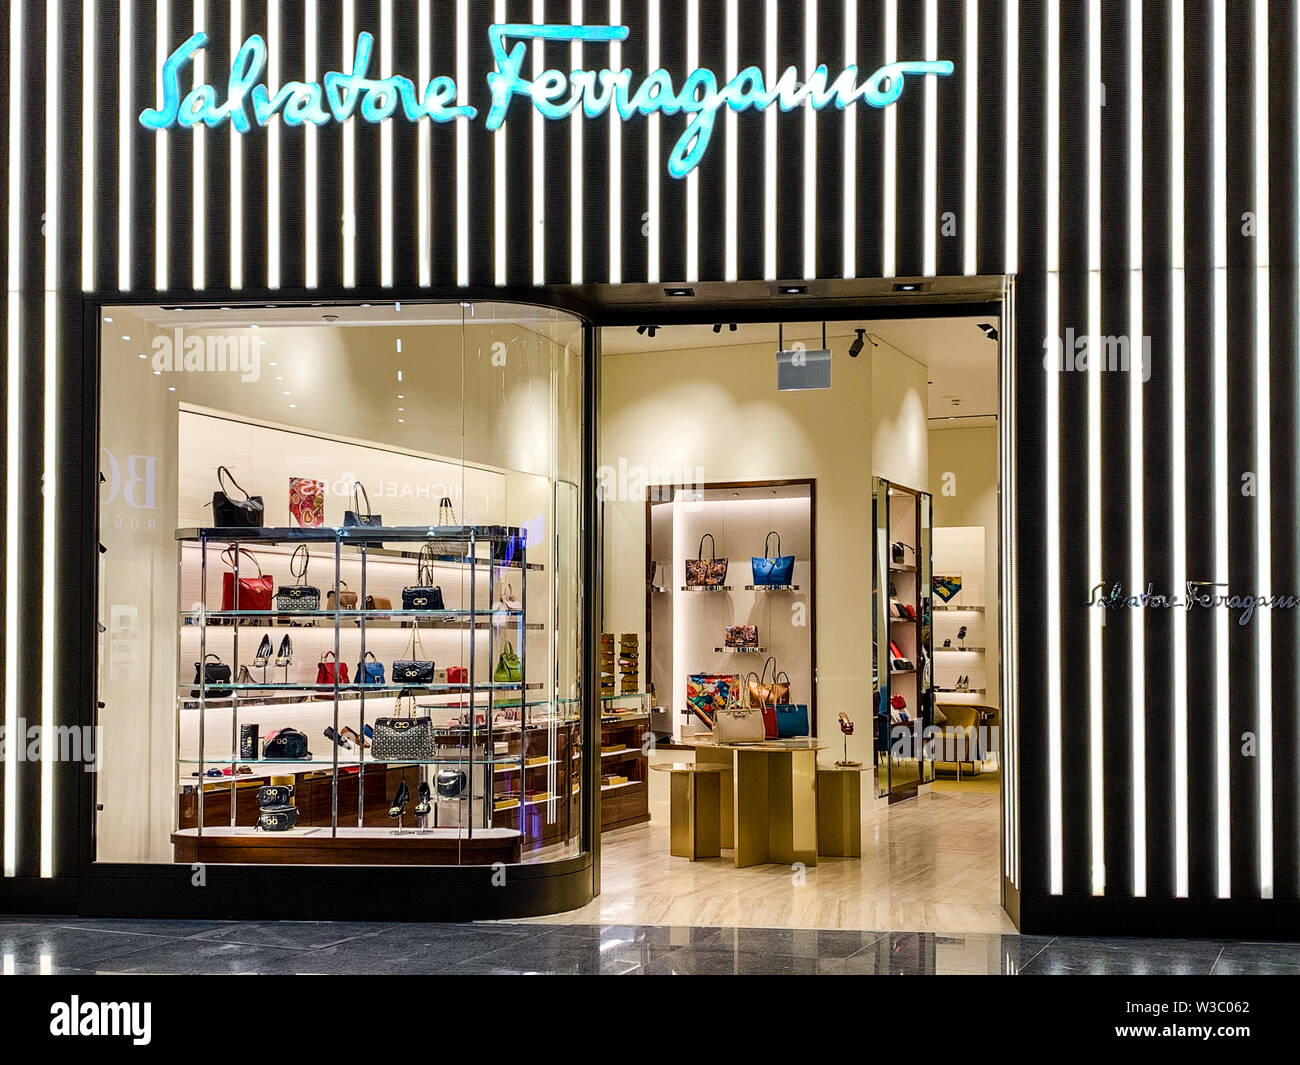 Italian Salvatore Ferragamo shop front, selling luxurious items. It is a famous Italian high end retailer, especially for shoes. Istanbul/ Turkey - Ap Stock Photo